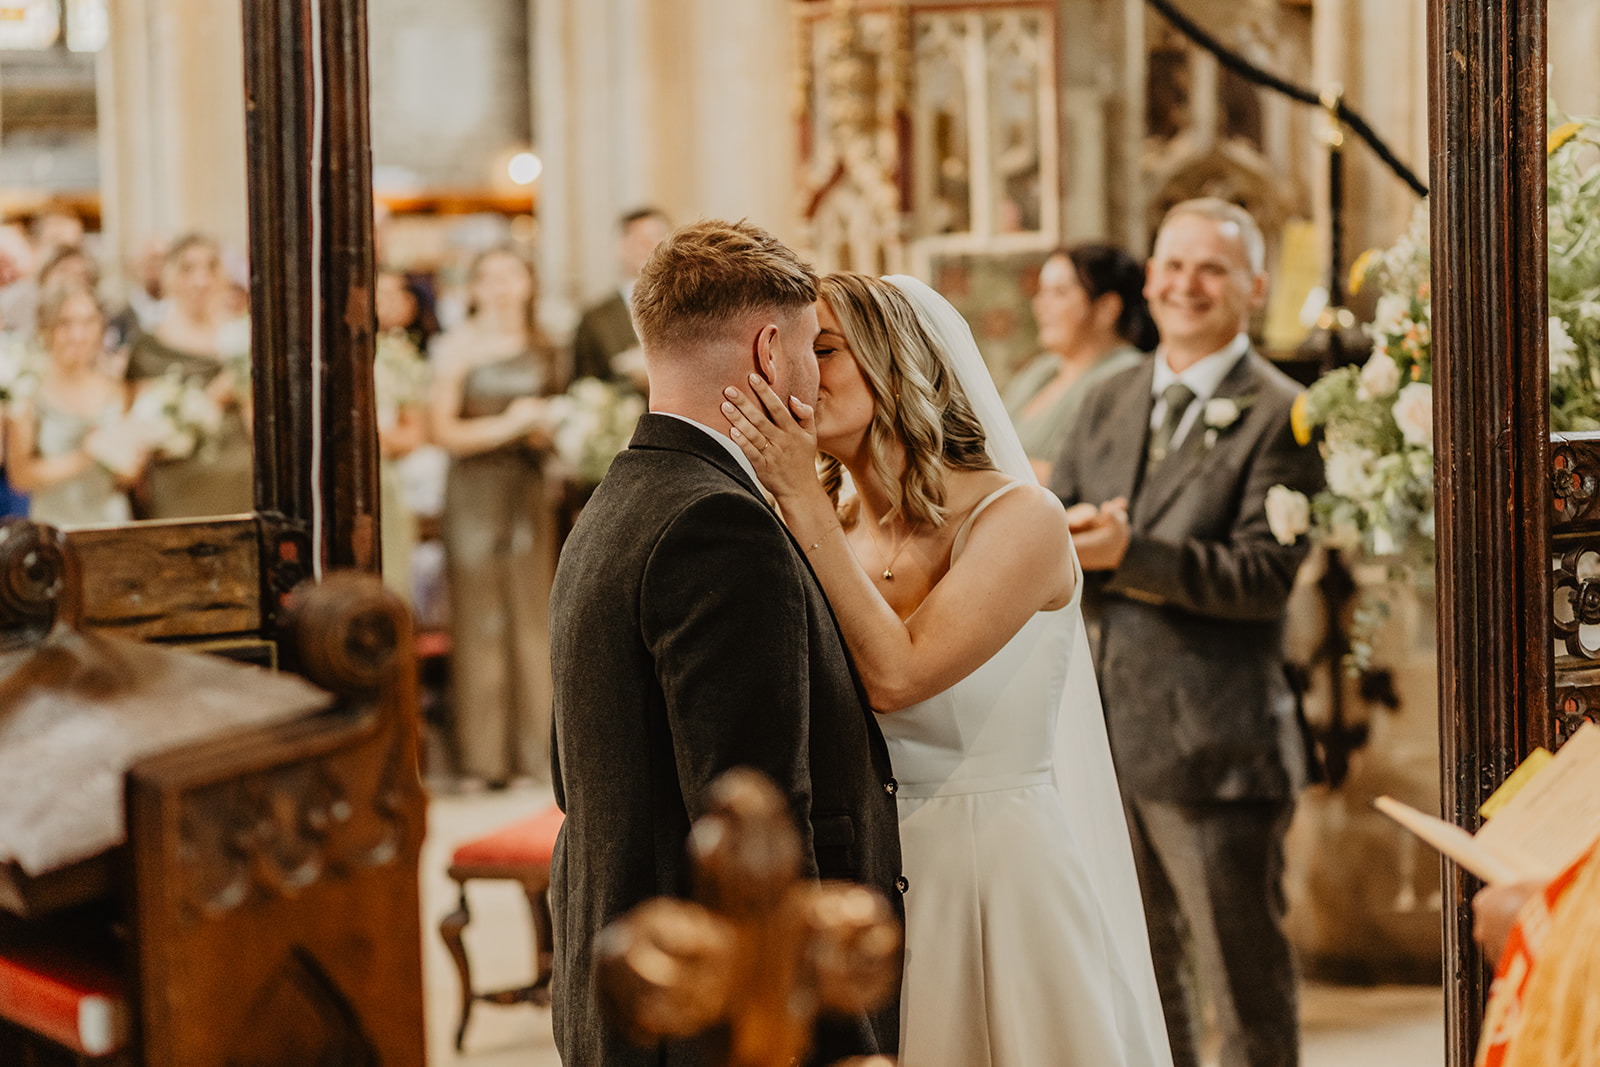 Bride and groom at a Great Tythe Barn Wedding, Cotswolds. By Olive Joy Photography.